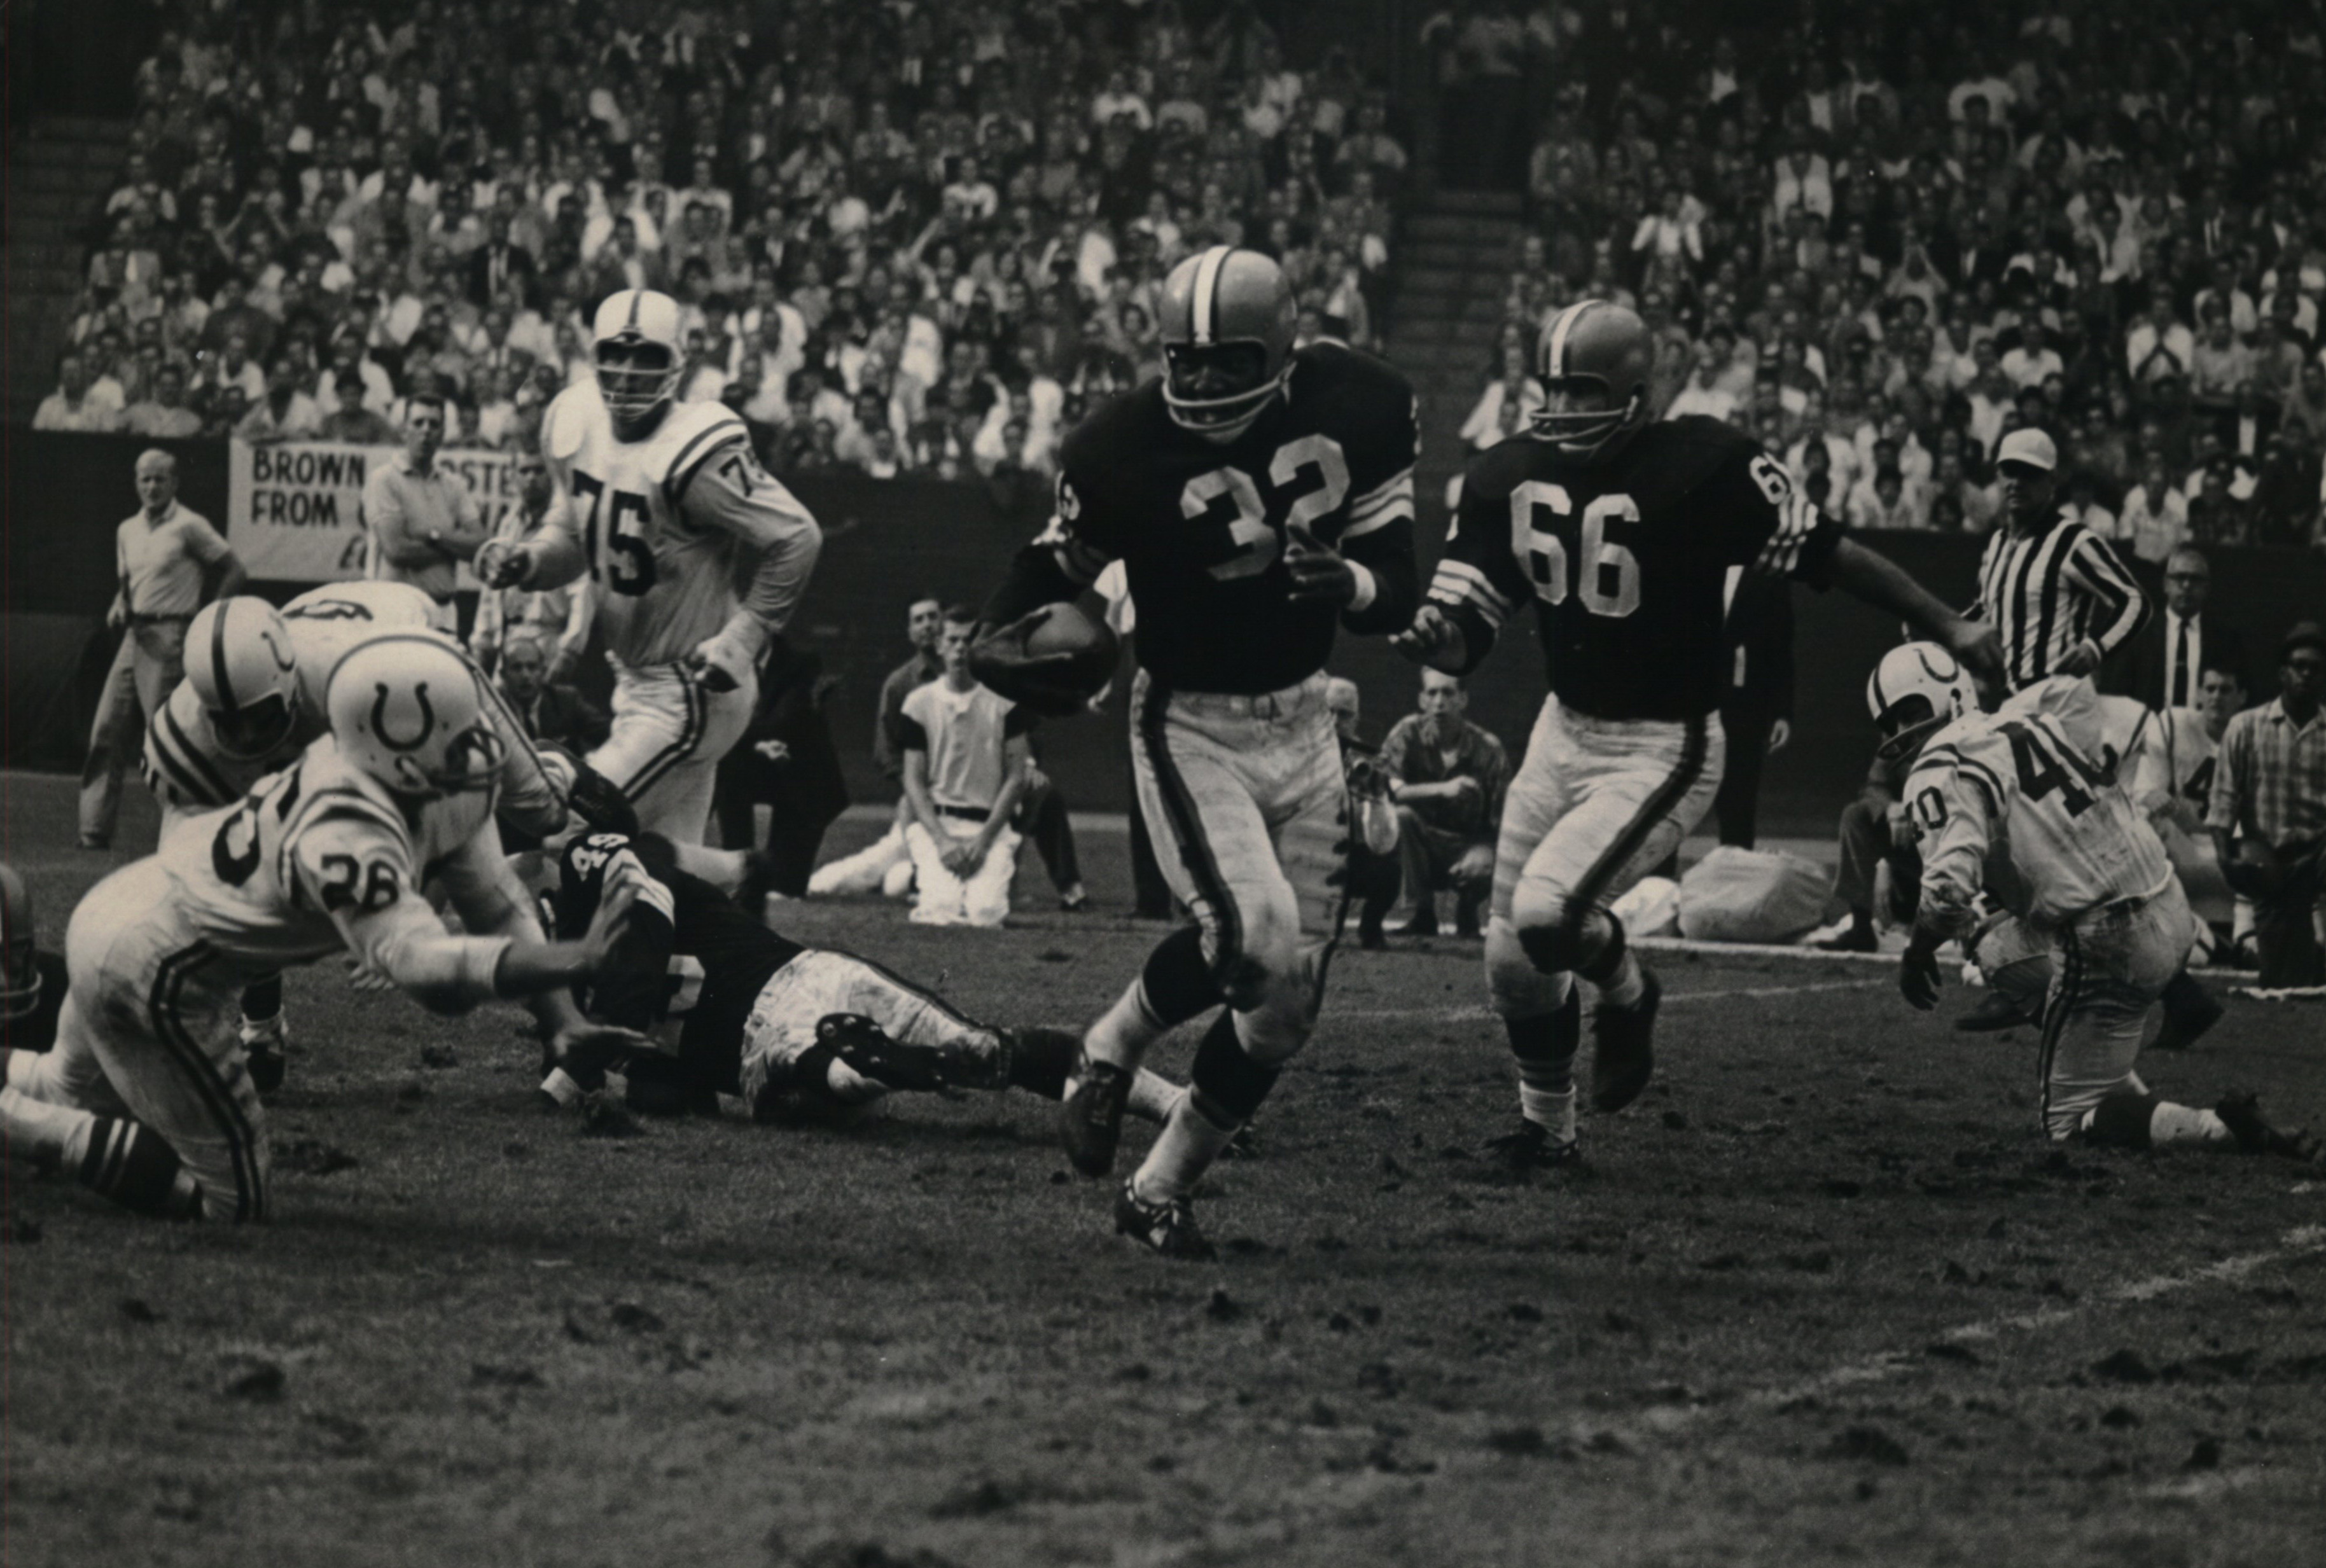 Jim Brown versus the Baltimore Colts in 1962.